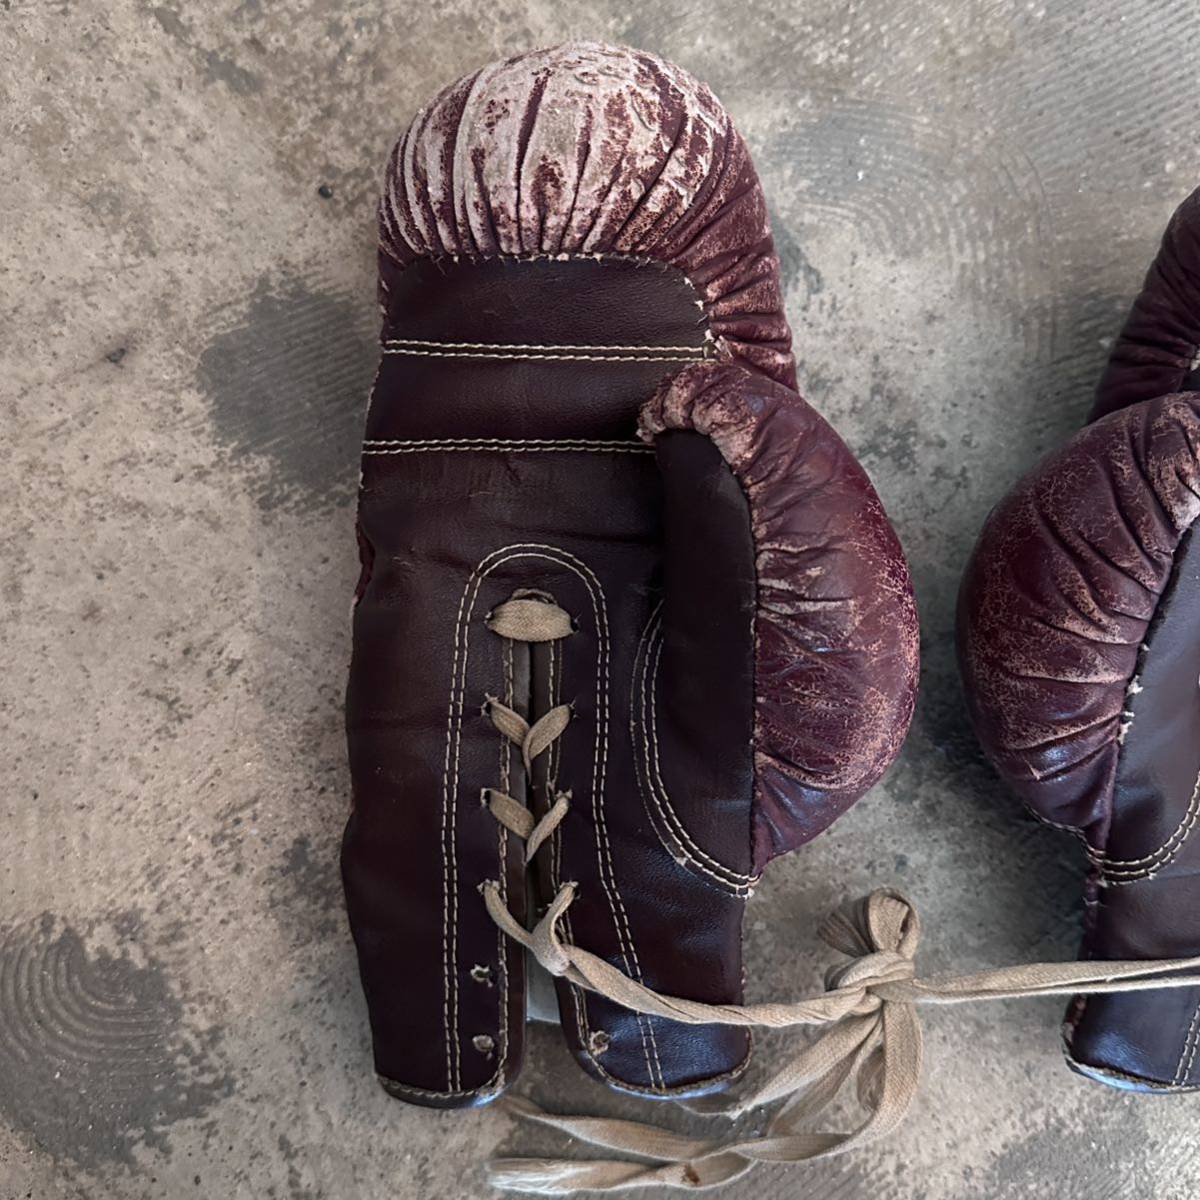 【Vintage】〜1960s Boxing Gloves ボクシンググローブ レザー 革 スポーツ 格闘技 ヴィンテージ アンティーク_画像7